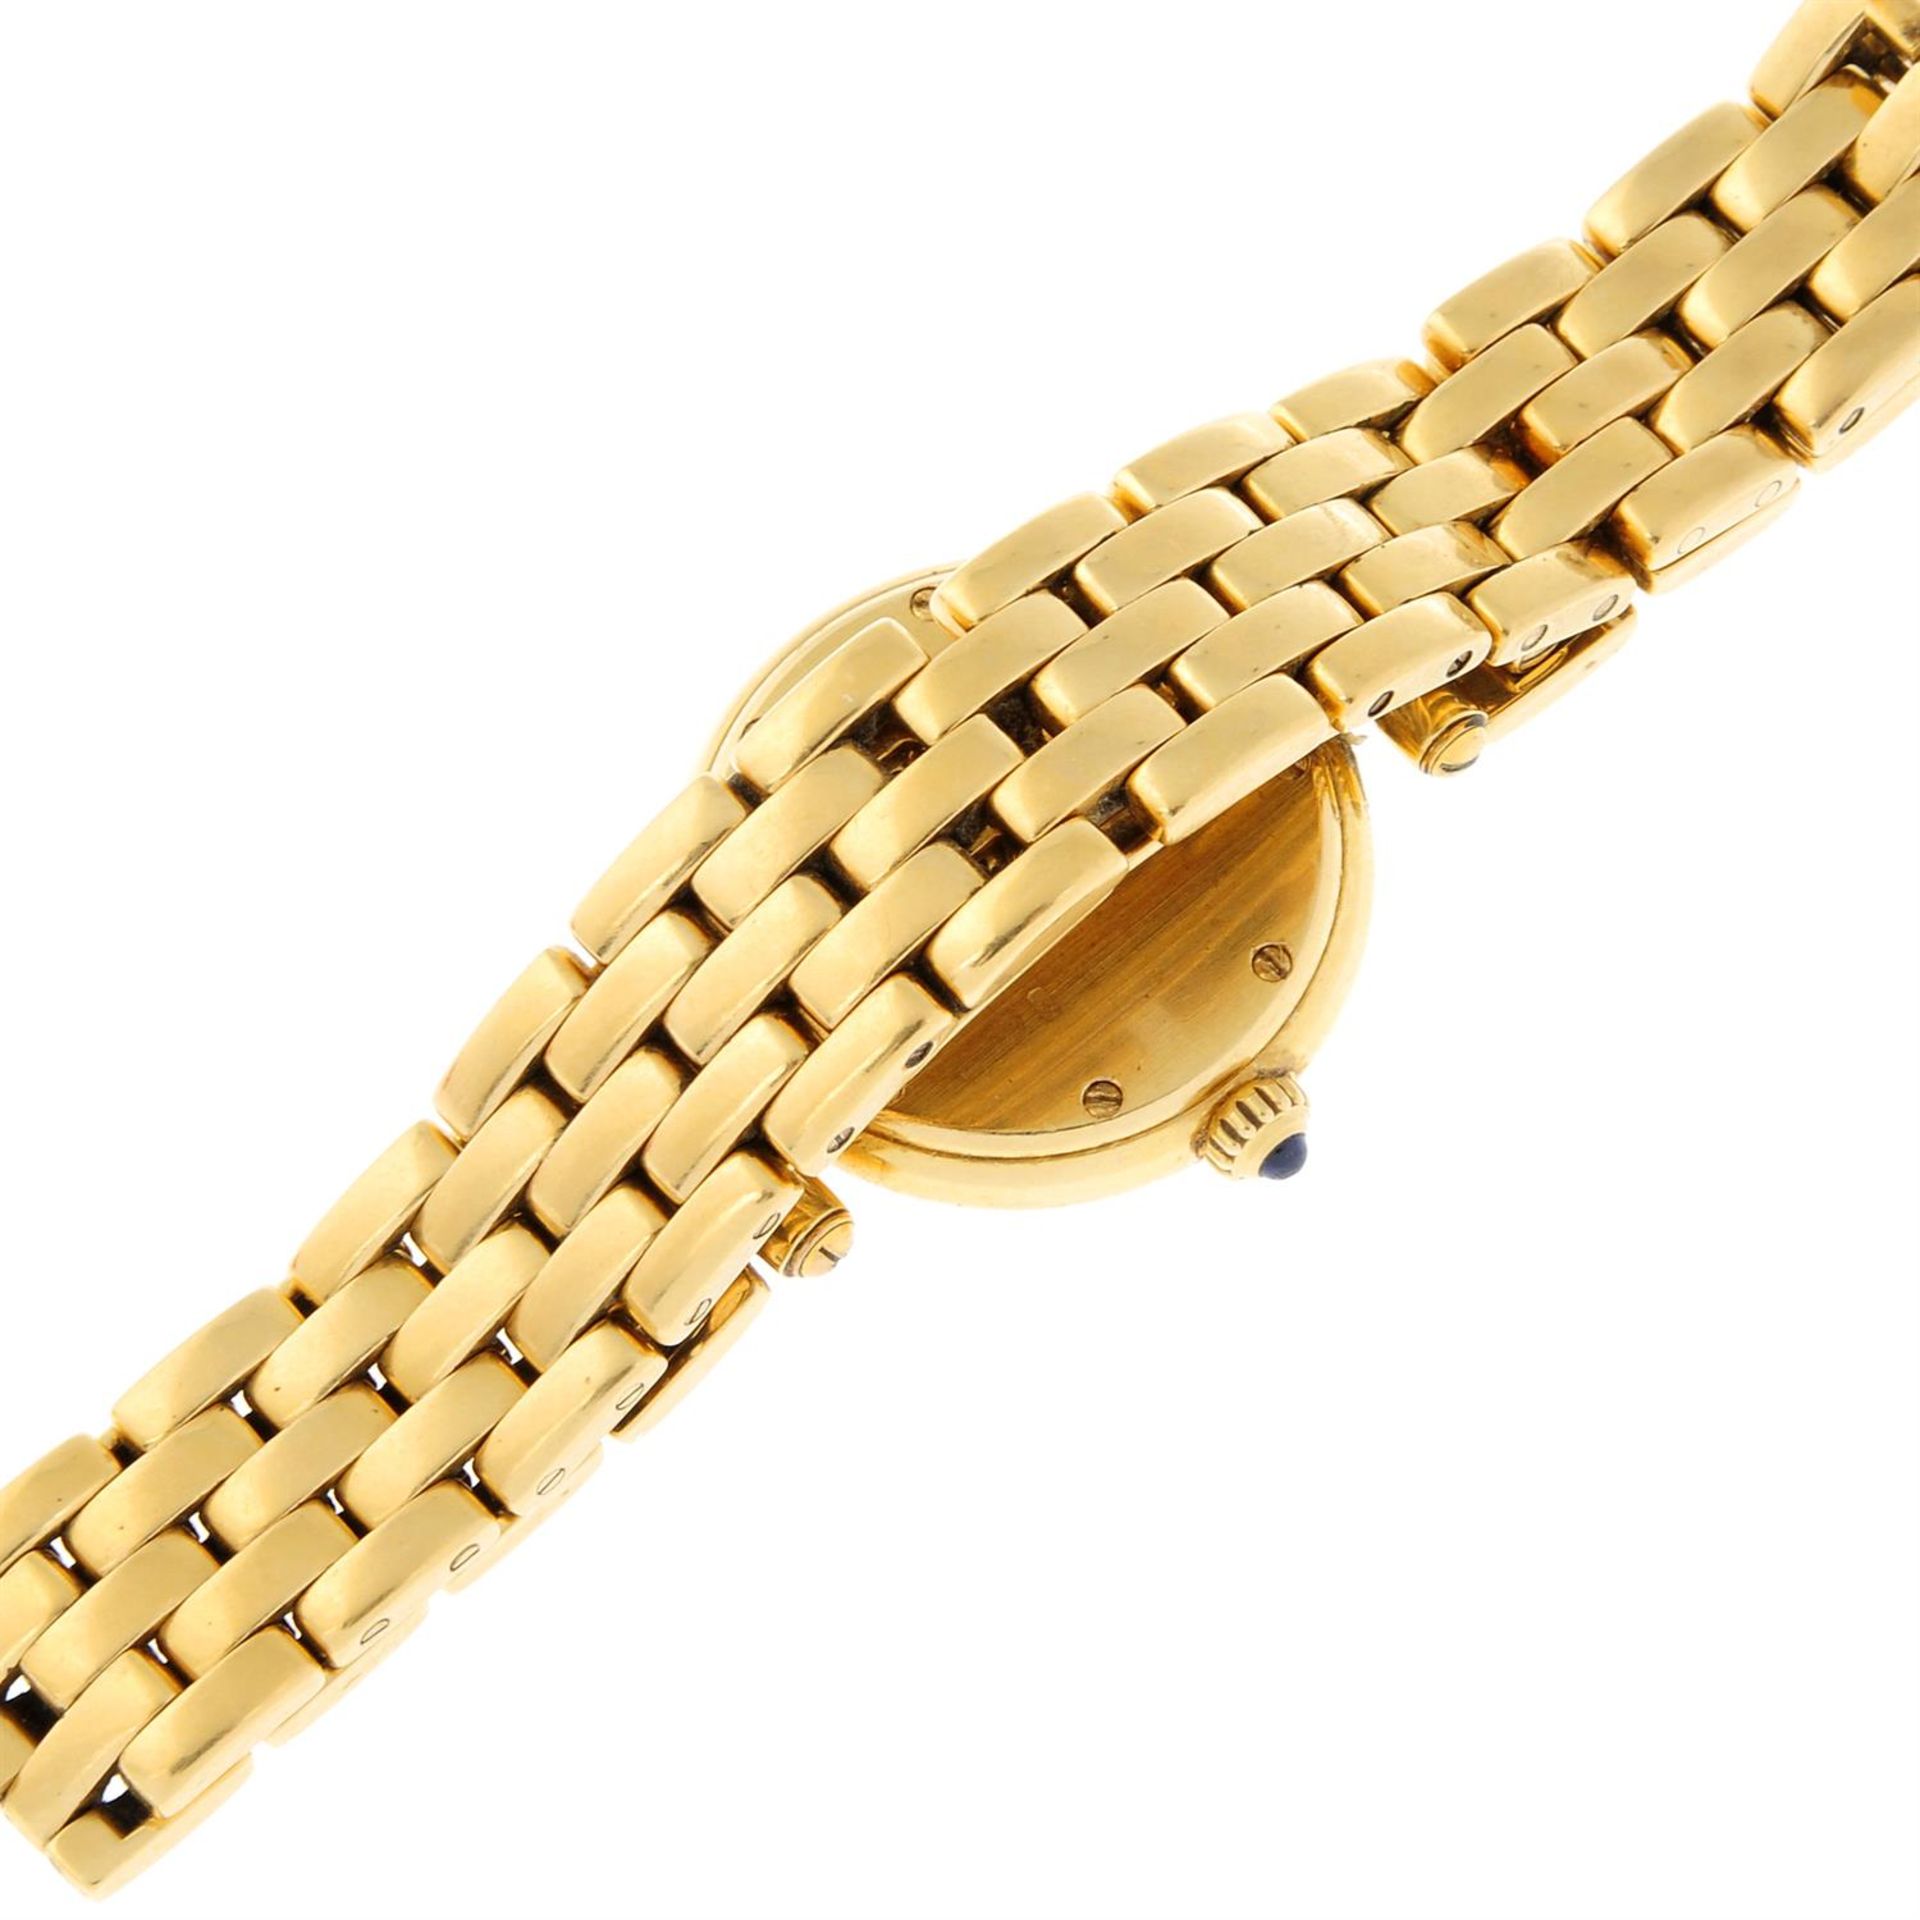 CARTIER - an 18ct yellow gold Panthere Vendome bracelet watch, 23.5mm. - Image 2 of 6